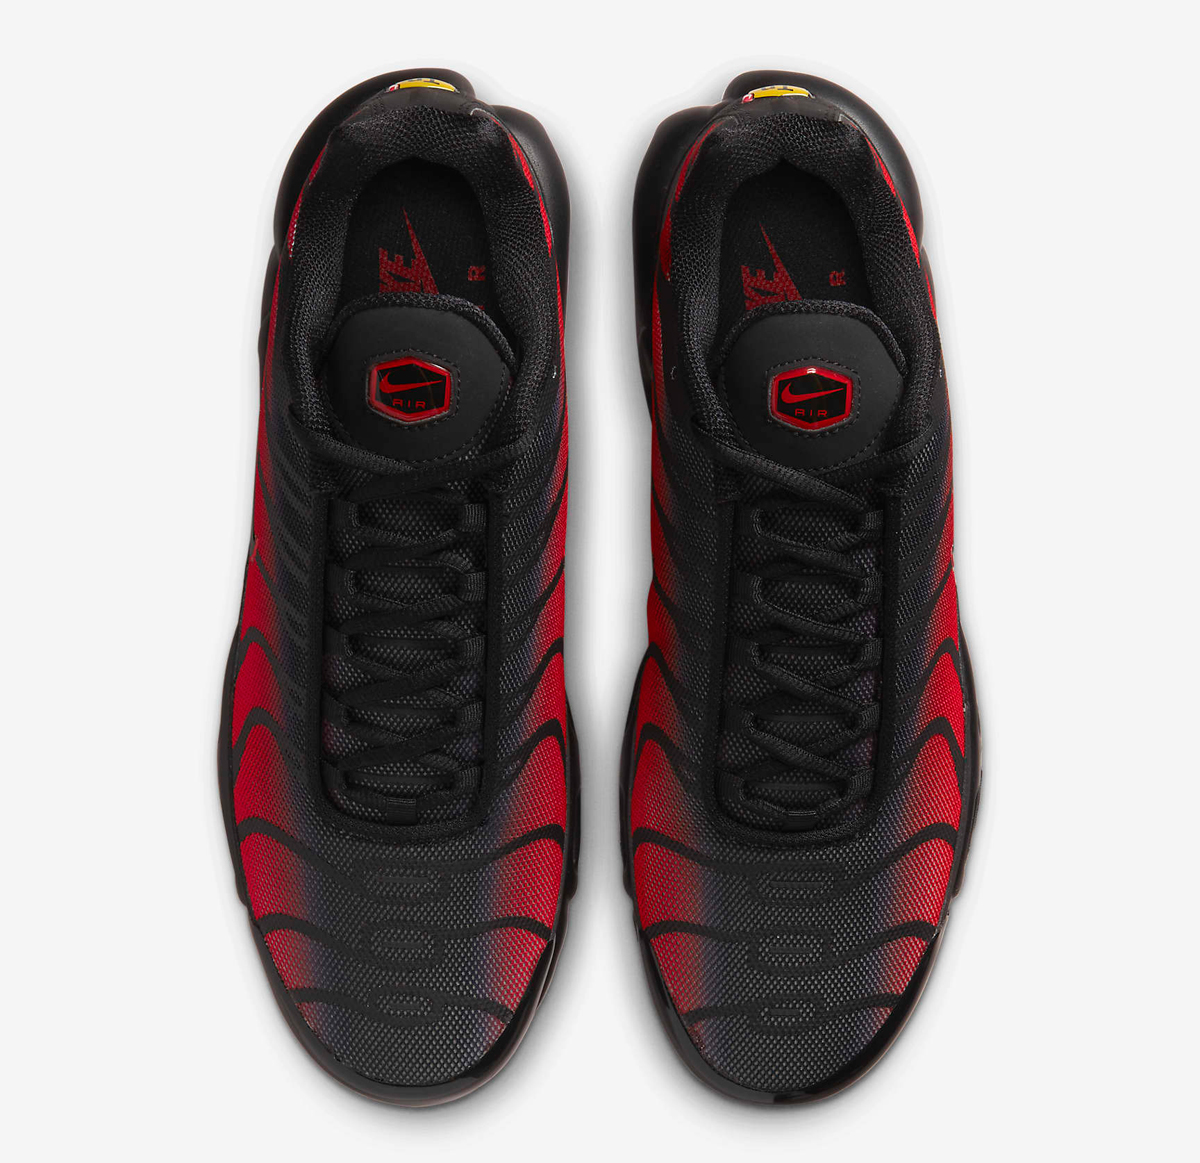 nike-air-max-plus-bred-university-red-black-release-date-4